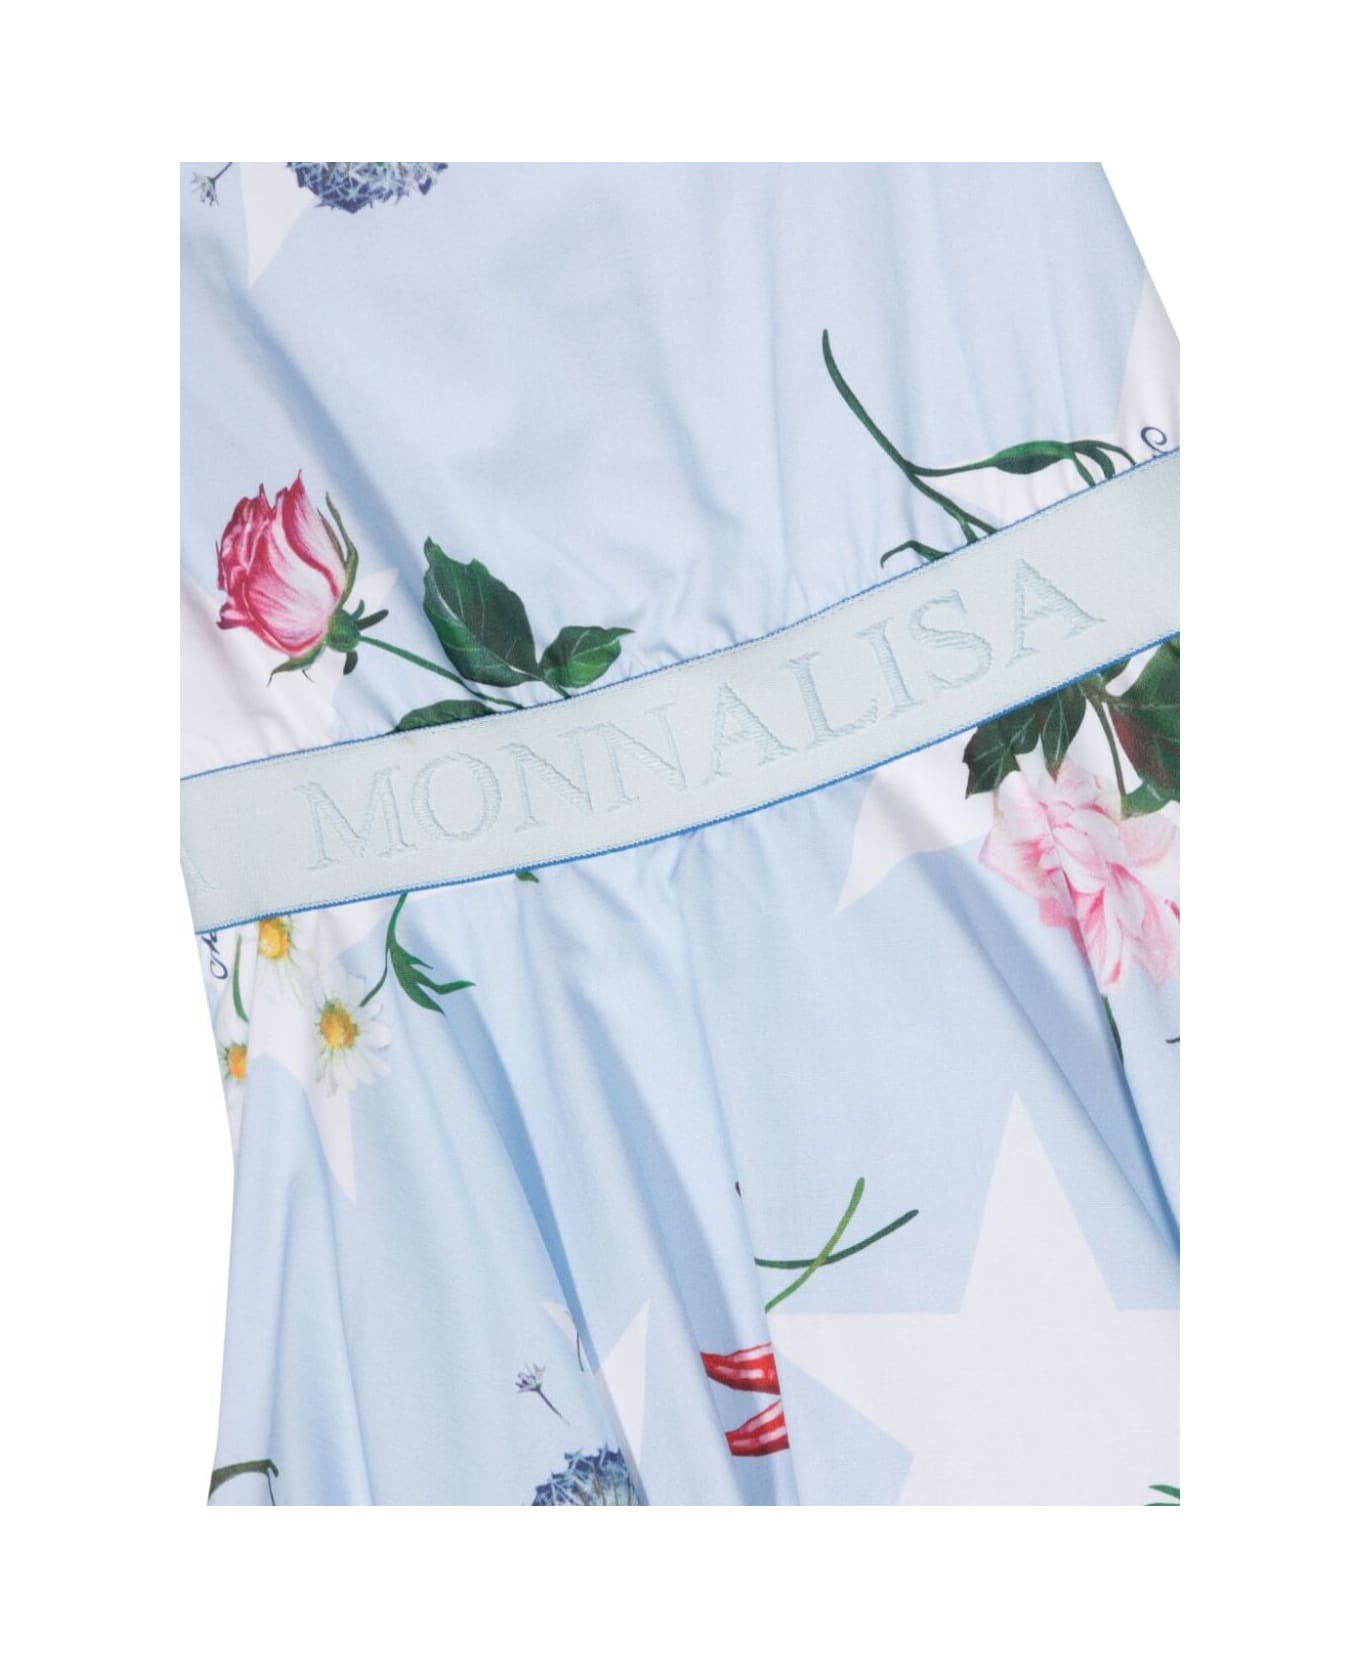 Monnalisa Blue Dress With Branded Band And Floreal Print In Cotton Girl - Light blue